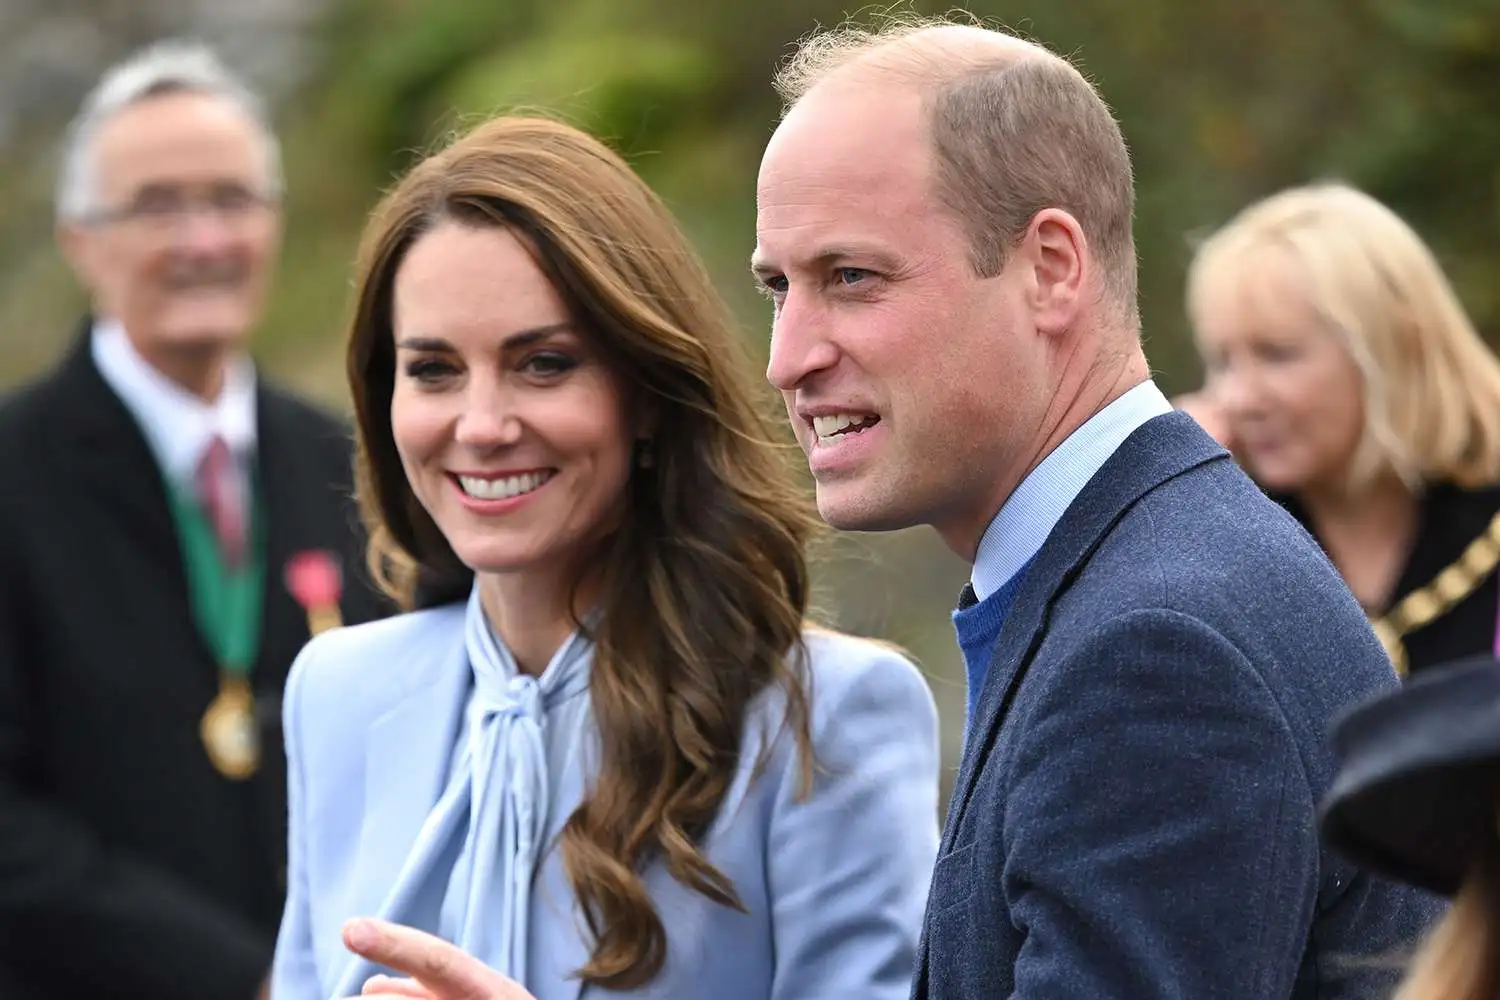 happy-kate-middleton-spotted-with-prince-william-on-visit-to-farm-shop-report